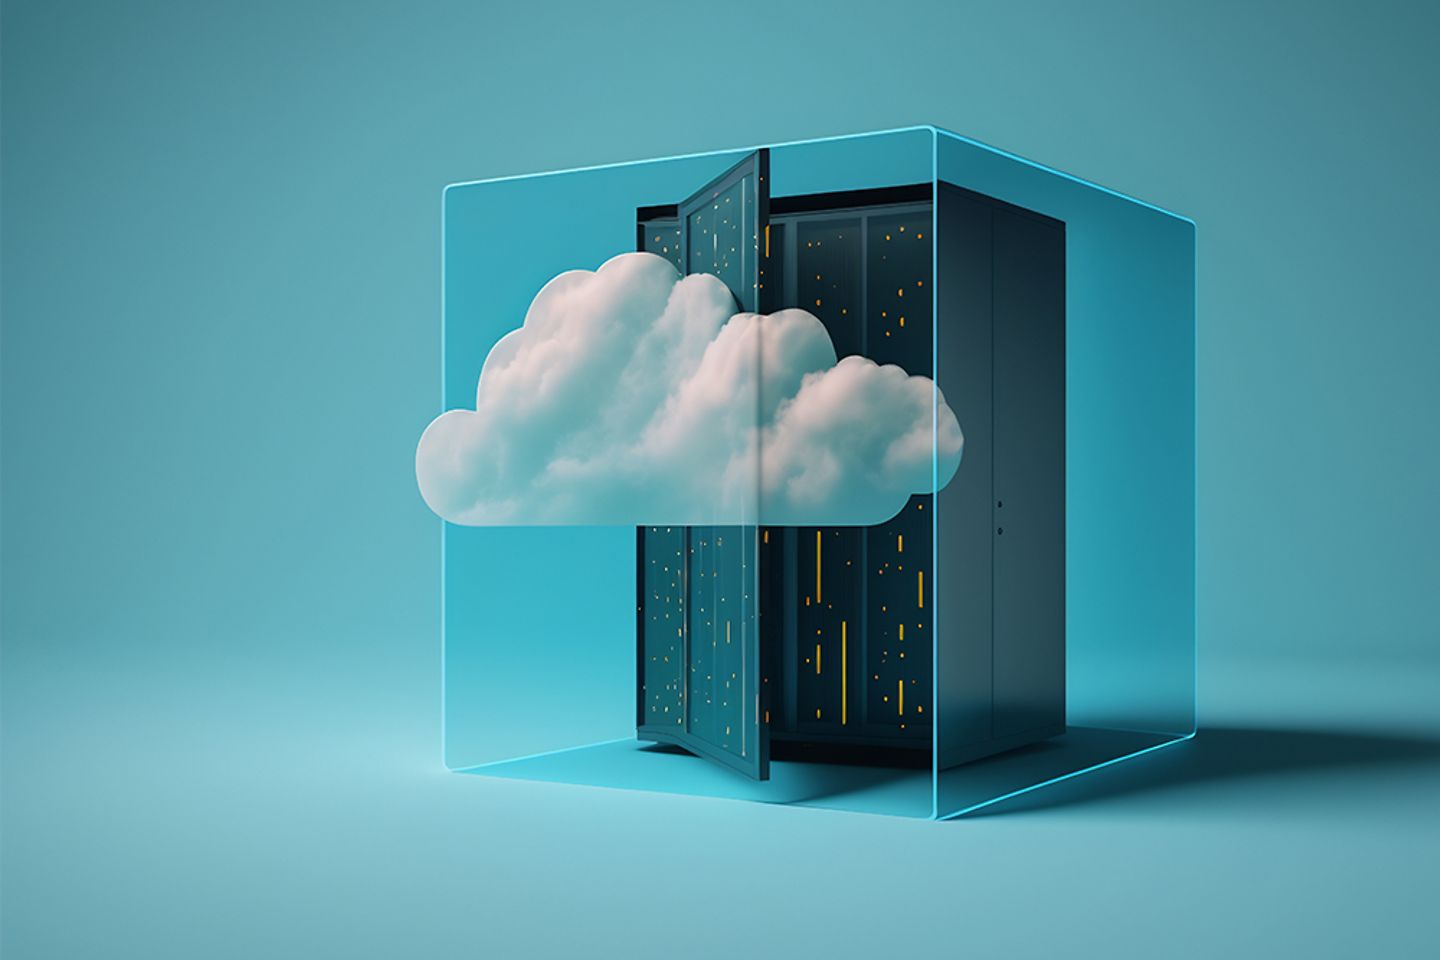 Graphic of a server rack and a cloud in a glas container